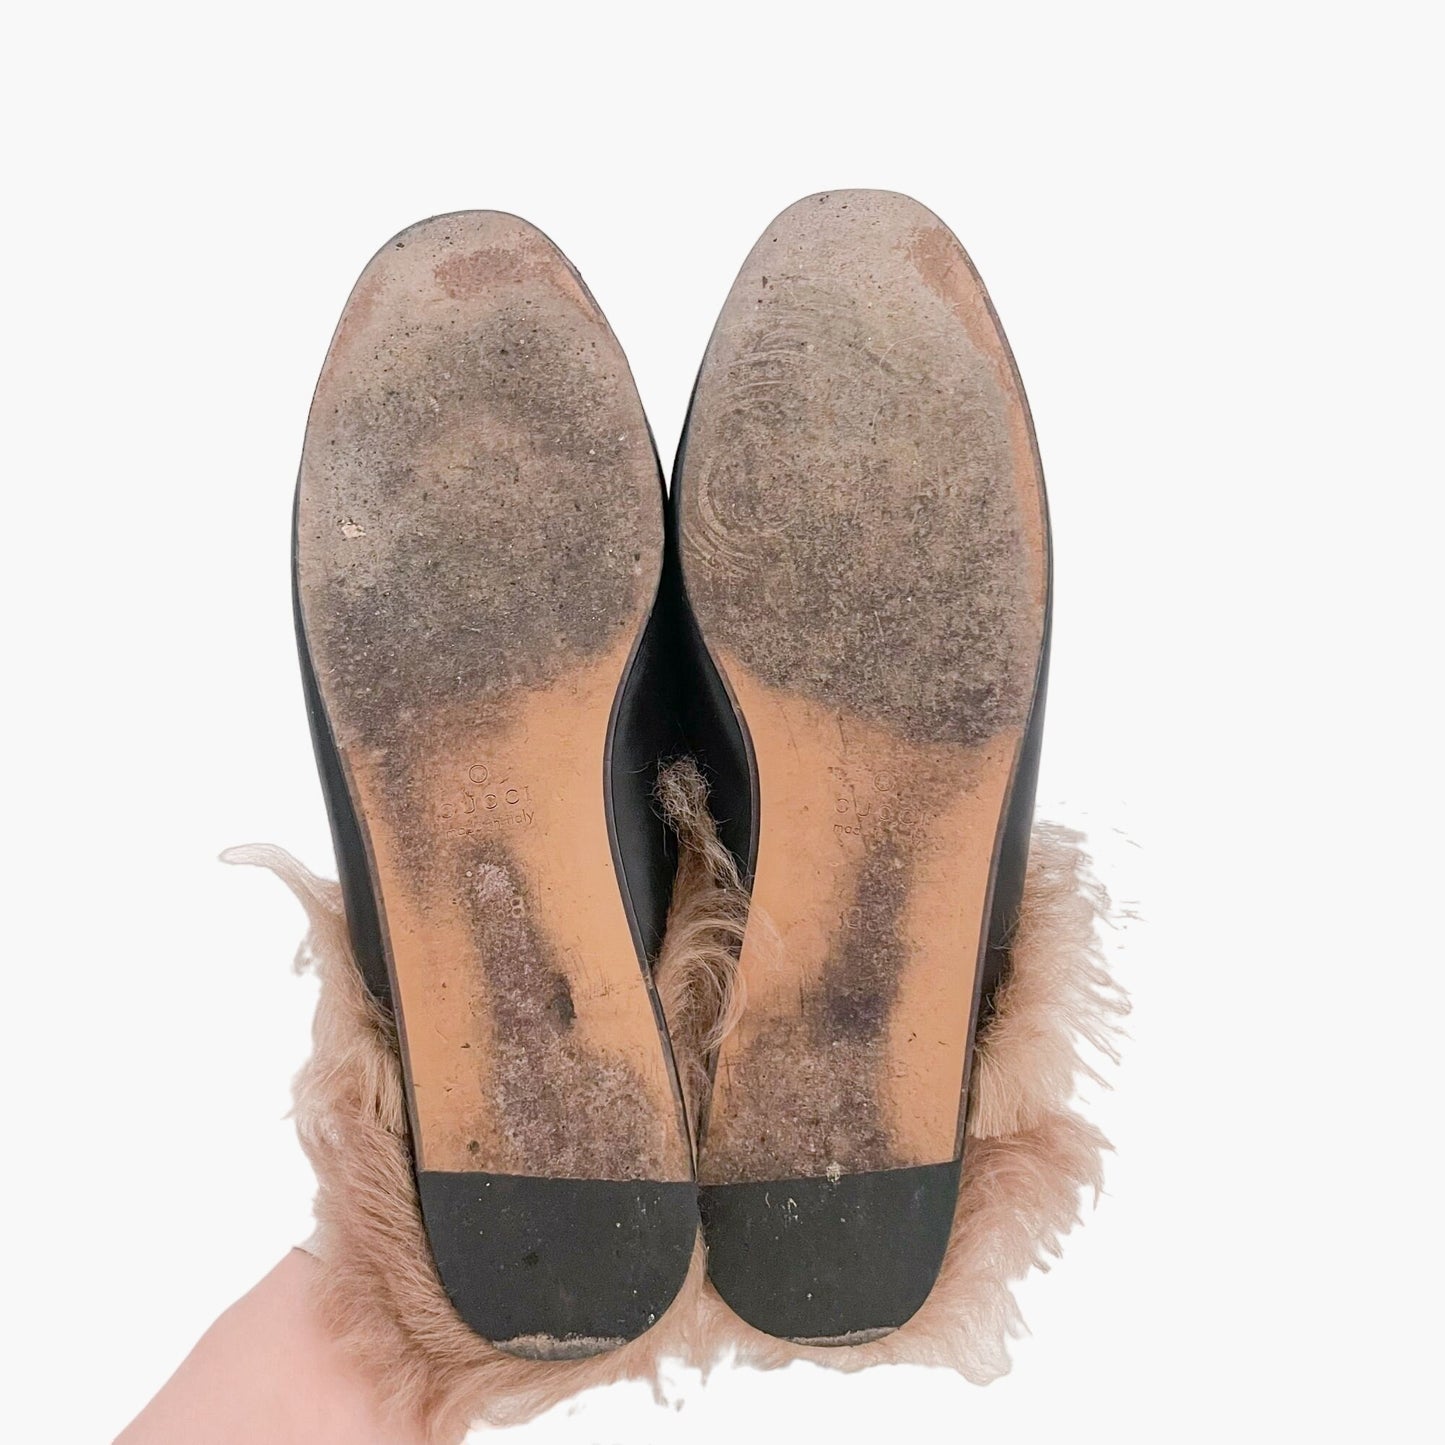 Gucci Princetown Fur-Lined Horsebit Slippers in Black Leather Size 38